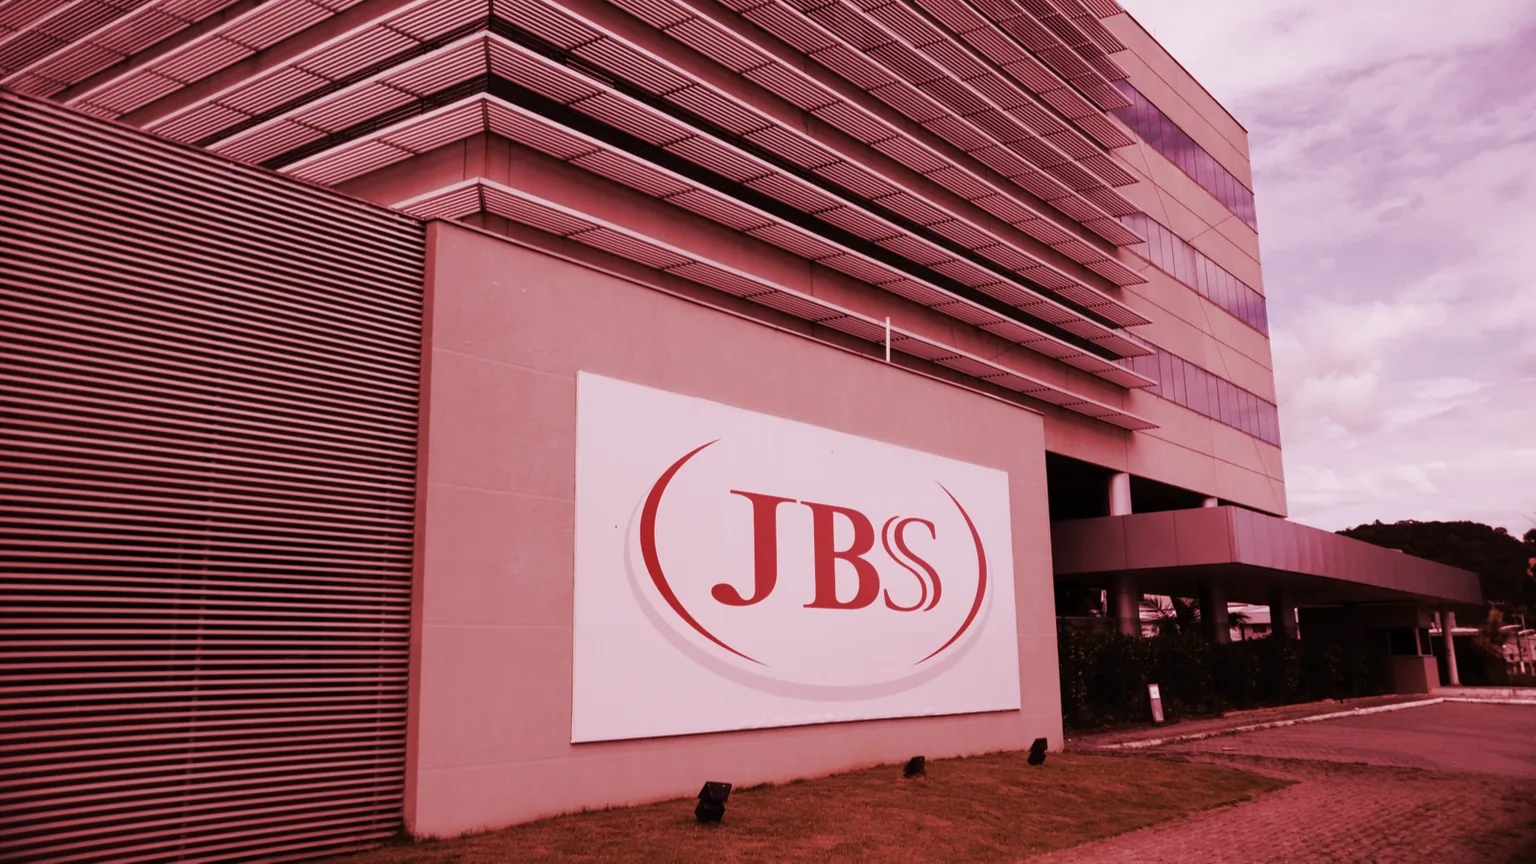 JBS is a food processing firm that supply the U.S. with roughly 20% of its meat supply. Image: Shutterstock 